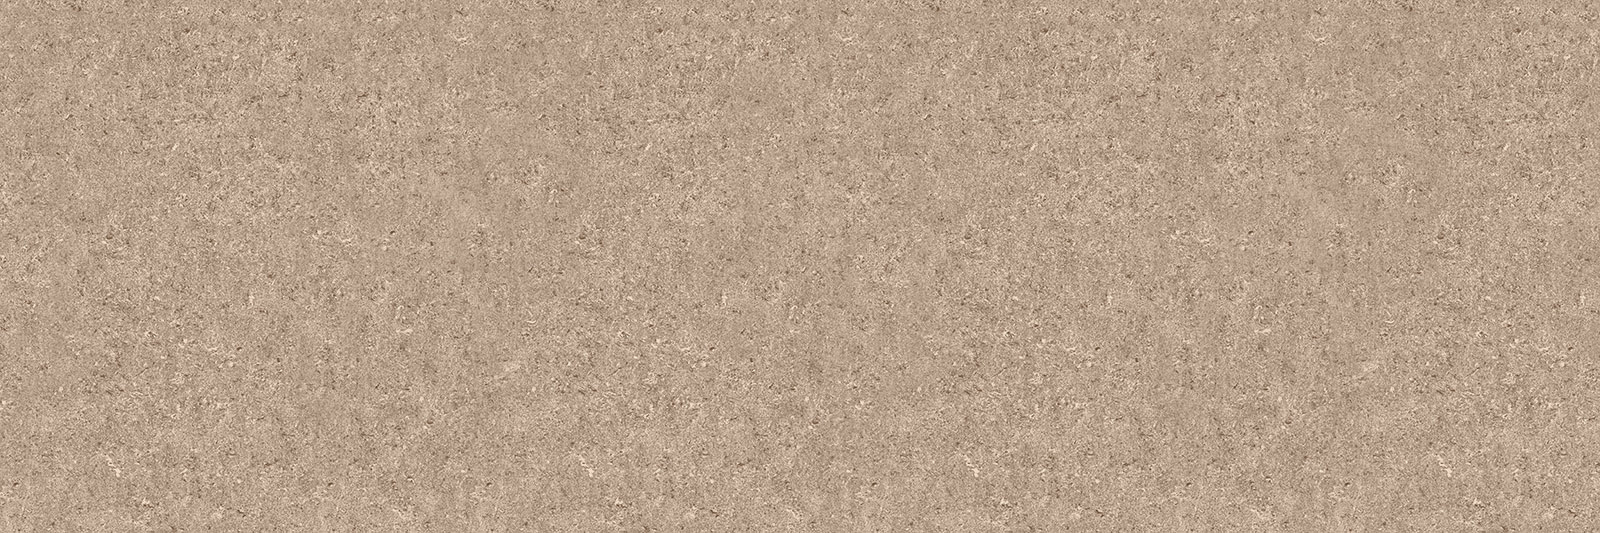 Speckled Stone Brown